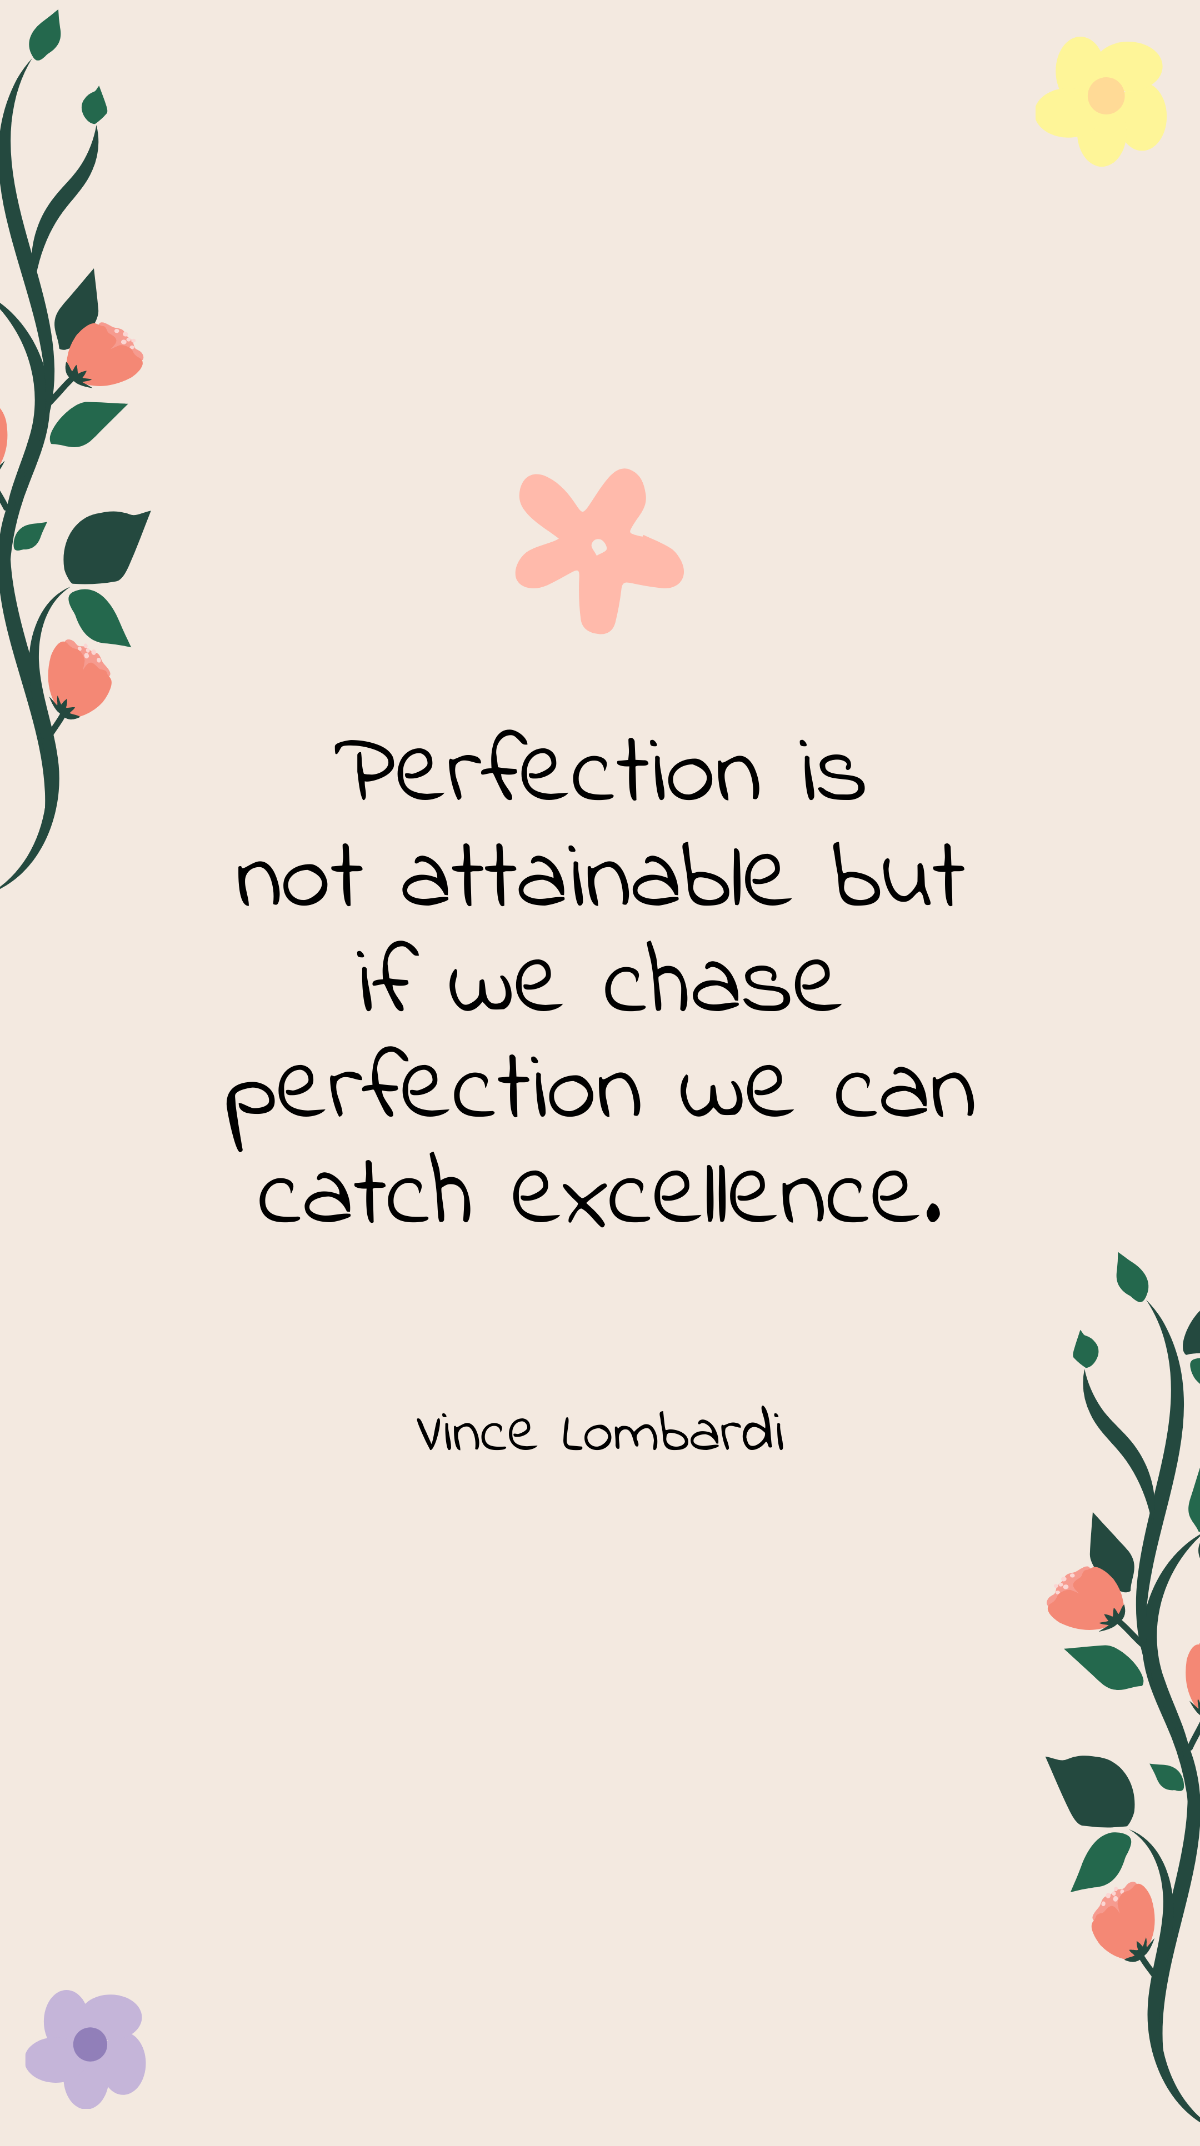 Vince Lombardi - Perfection is not attainable but if we chase perfection we can catch excellence.